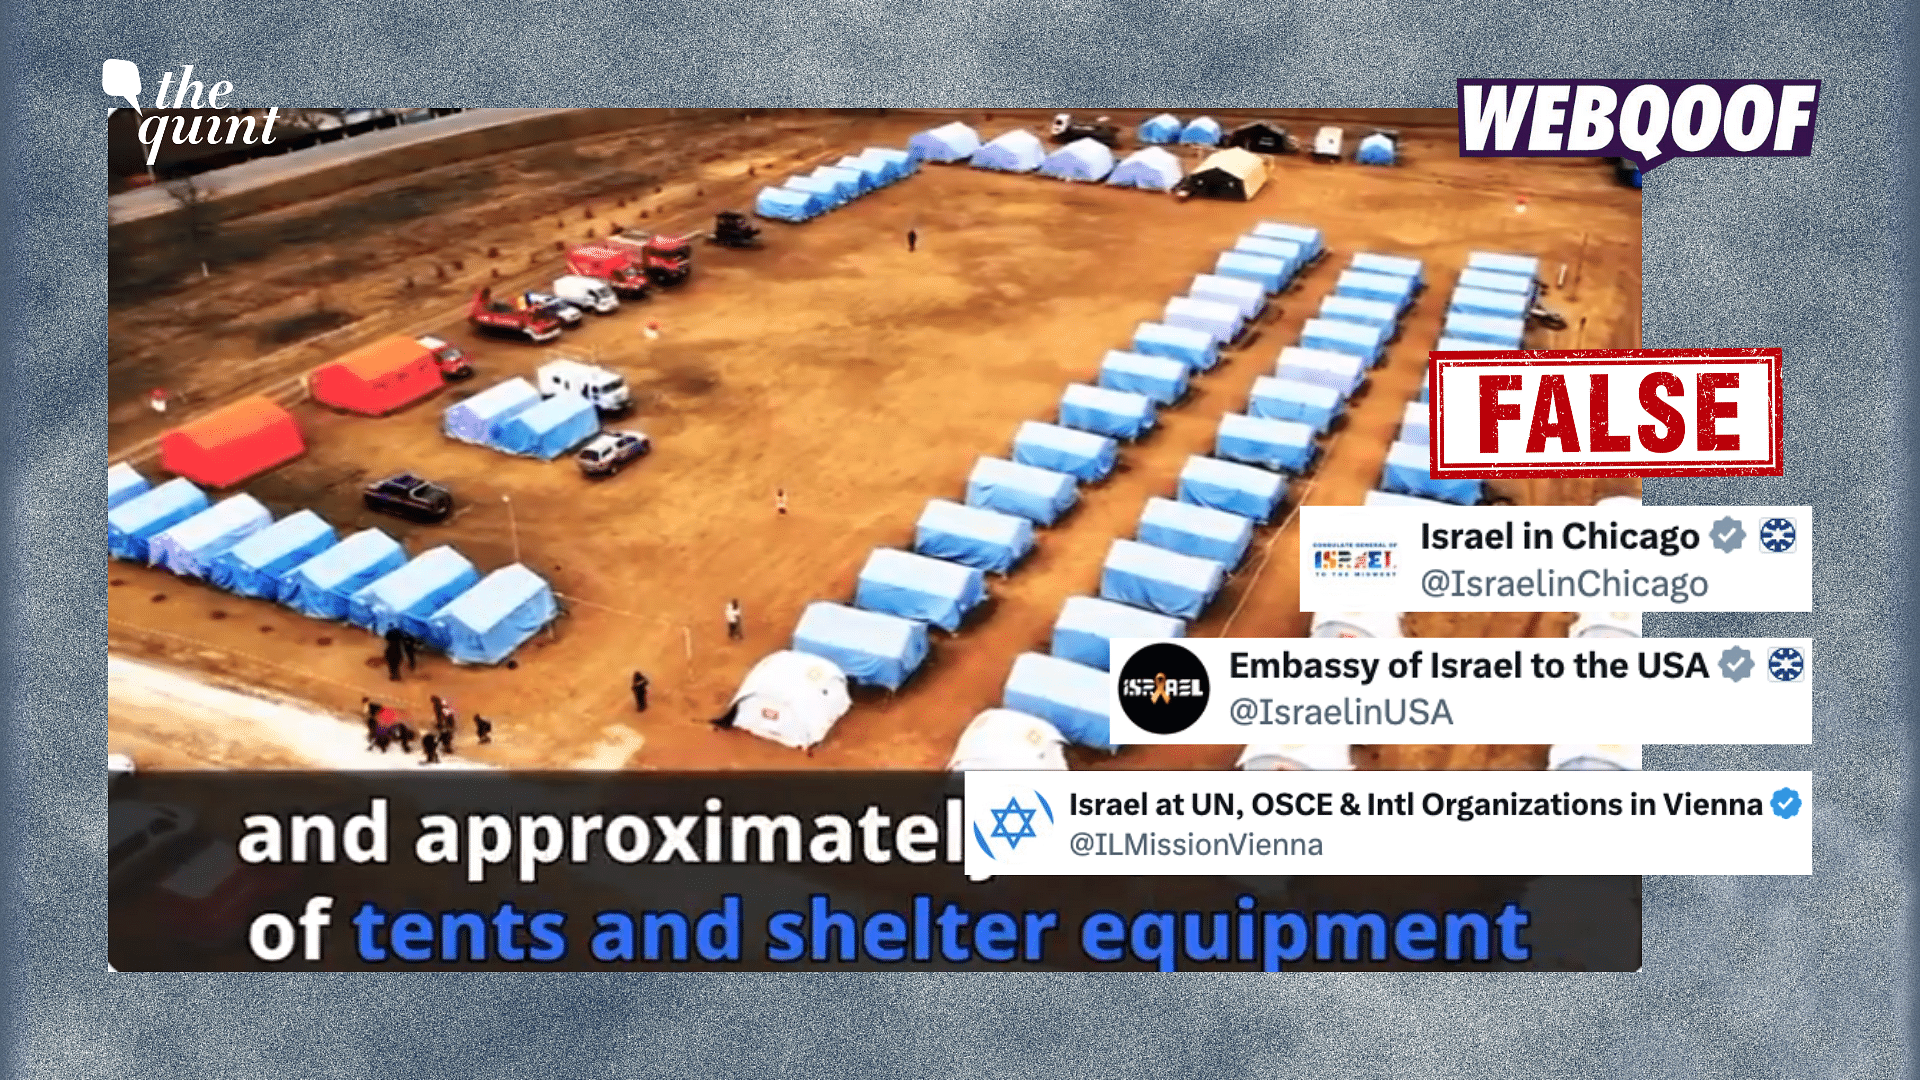 <div class="paragraphs"><p>This clip showing tents and shelter equipment has no connection to Israel, Palestine, or Hamas.</p></div>